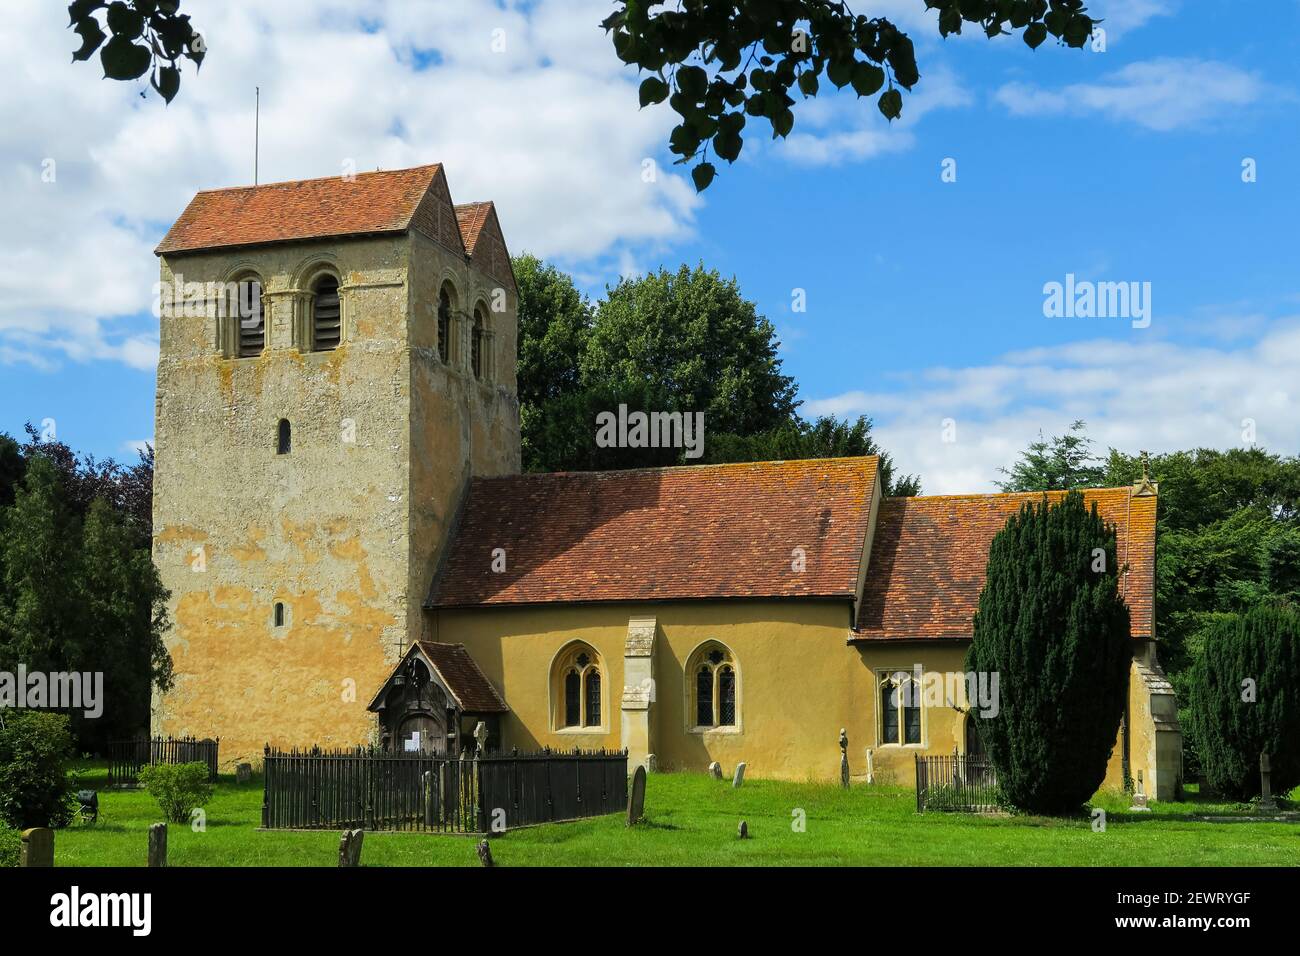 St. Bartholomew's church with its famous 12th century Norman Tower at Fingest in the Hambleden Valley, Fingest, The Chilterns, Buckinghamshire Stock Photo